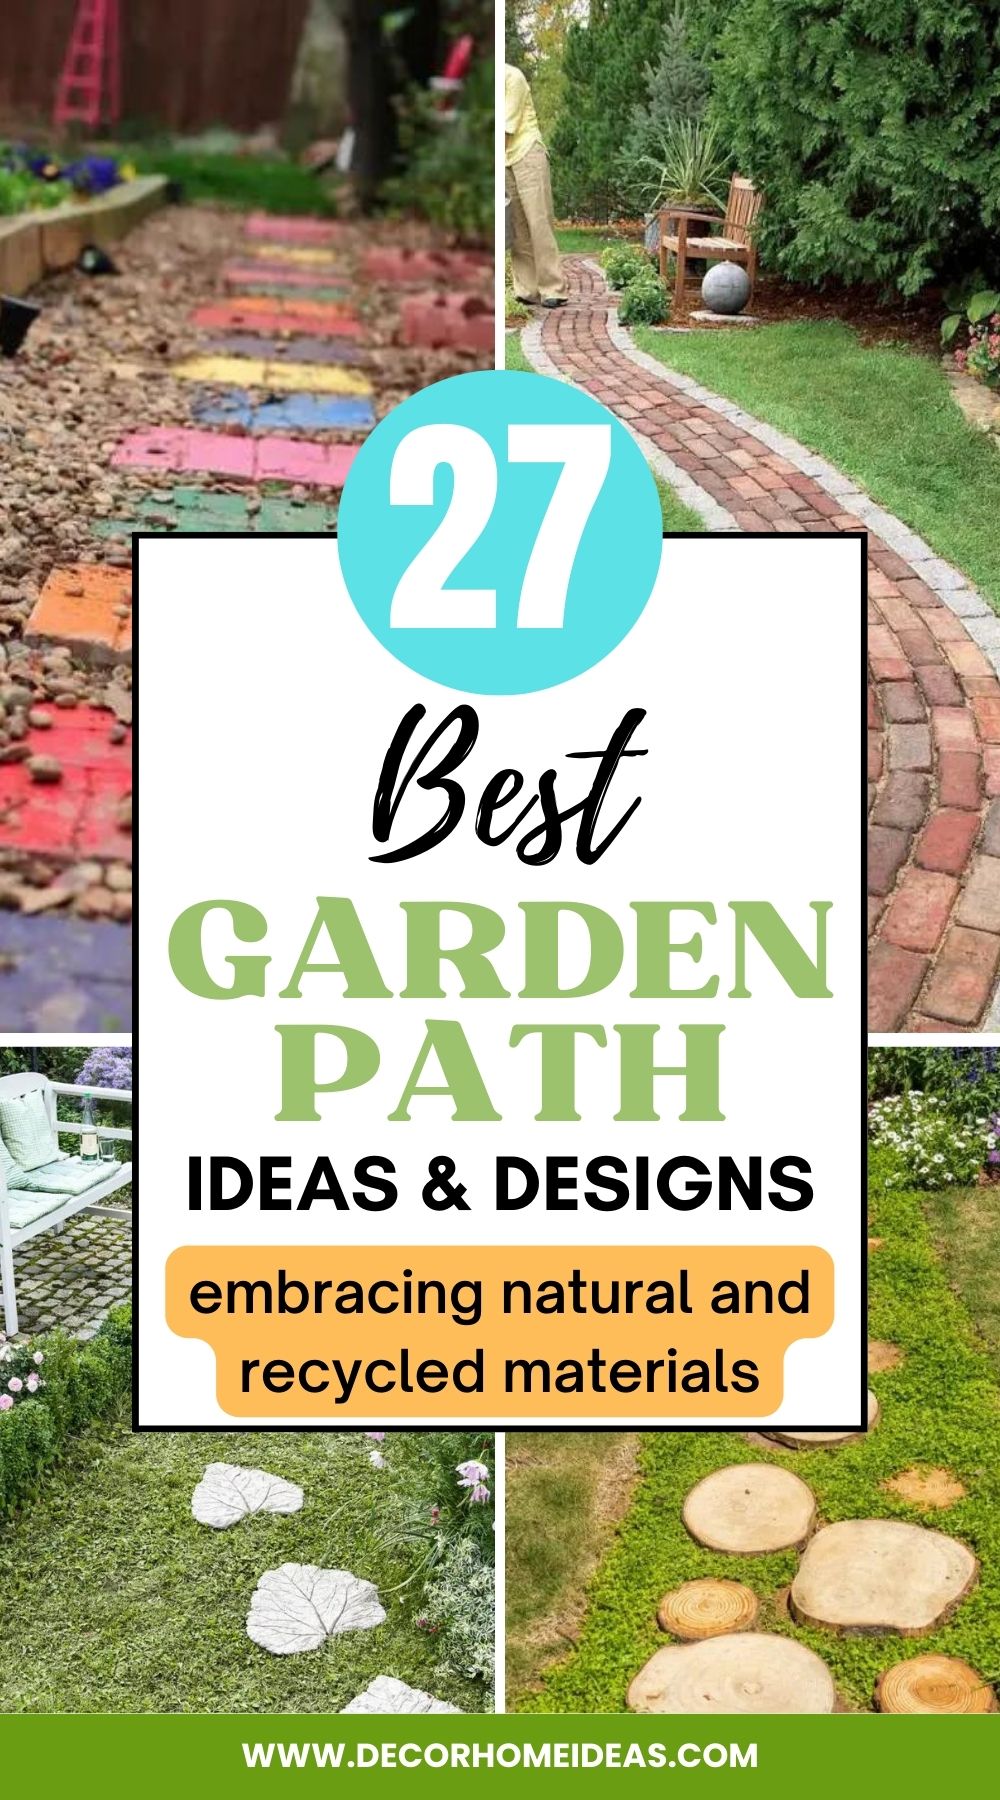 Get inspired with 27 creative garden path ideas, featuring natural and recycled materials. From stone to wood, create a unique outdoor path with these DIY projects.